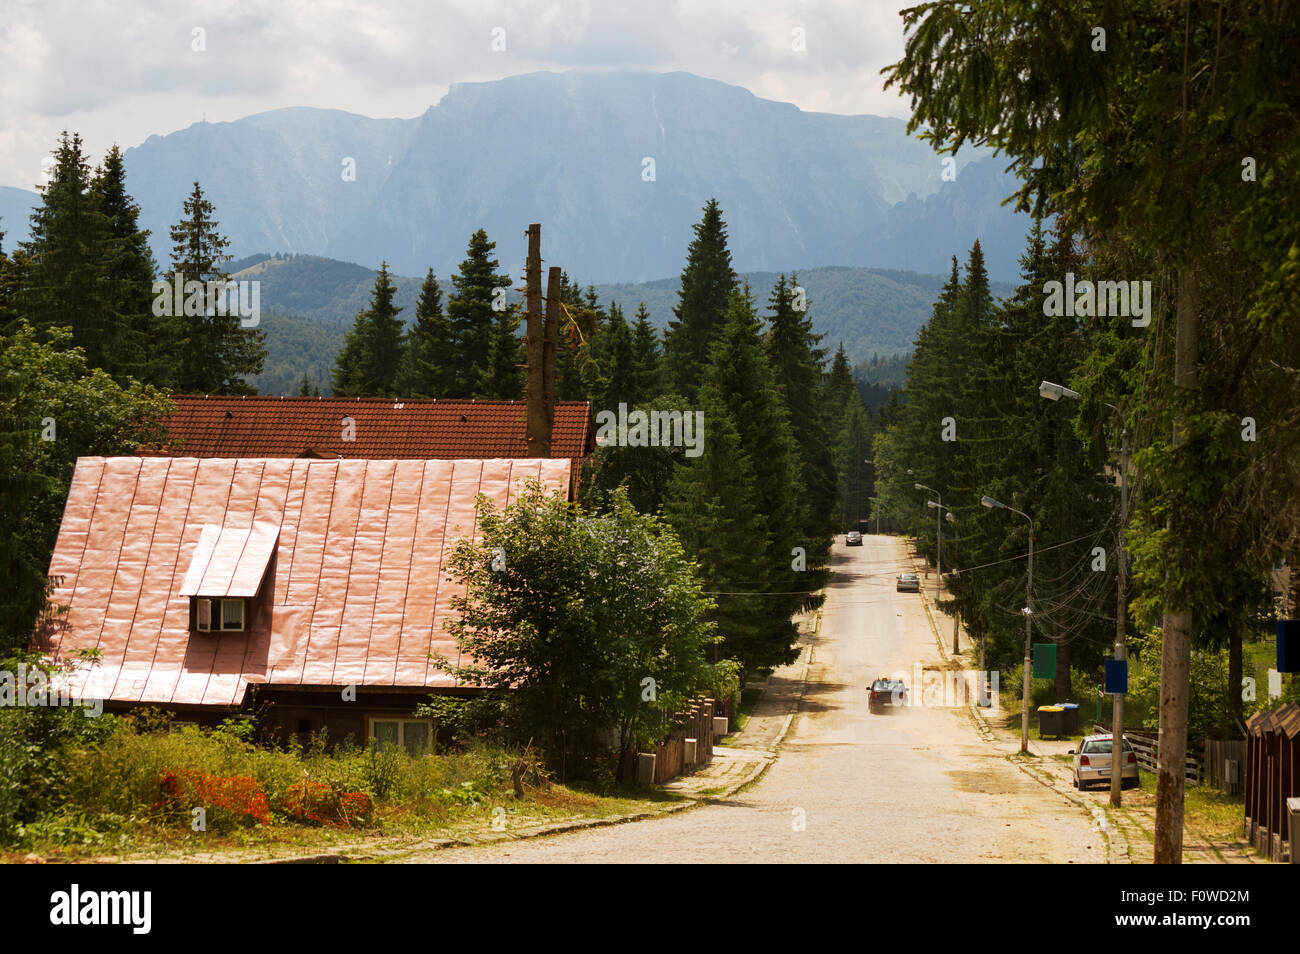 Village in the mountains Stock Photo